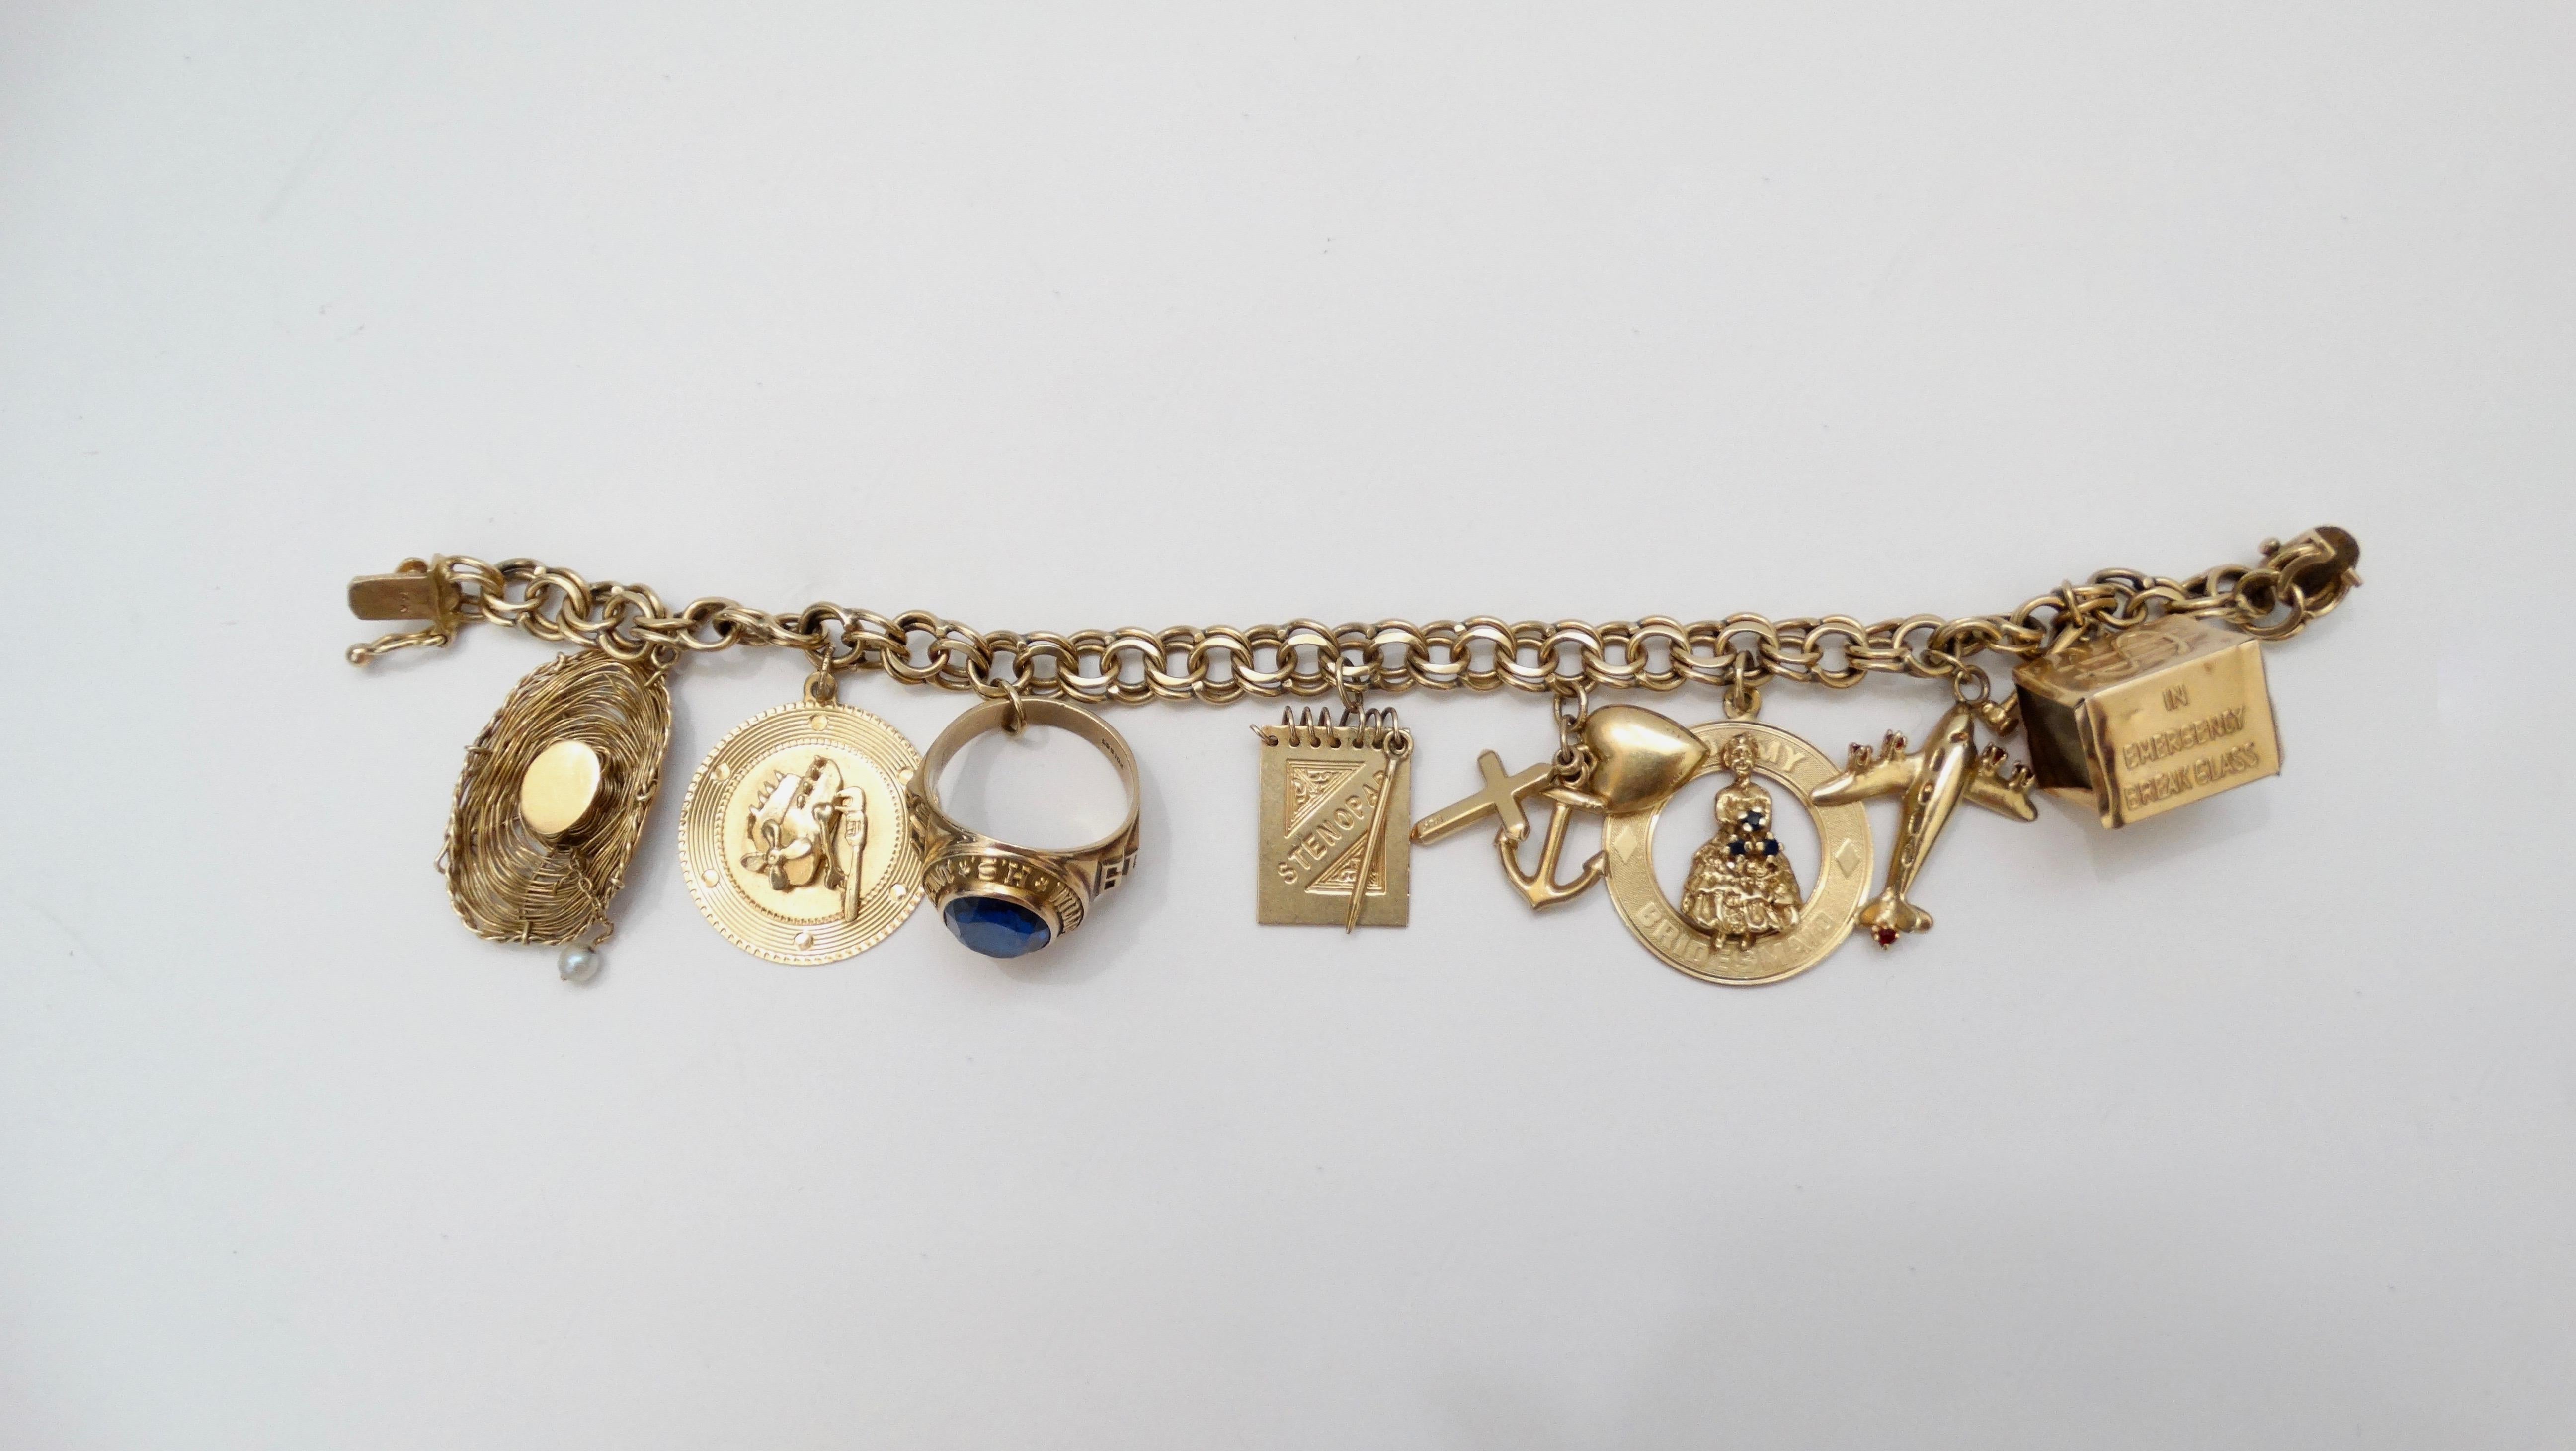 Gorgeous 14k Gold charm bracelet from 1950s/1960s. Bracelet features a variety of eight 14k Gold charms encrusted with pearls, ruby and sapphire including a cowboy hat, class ring, airplane, money box, a bridesmaid and a cluster of a cross, heart